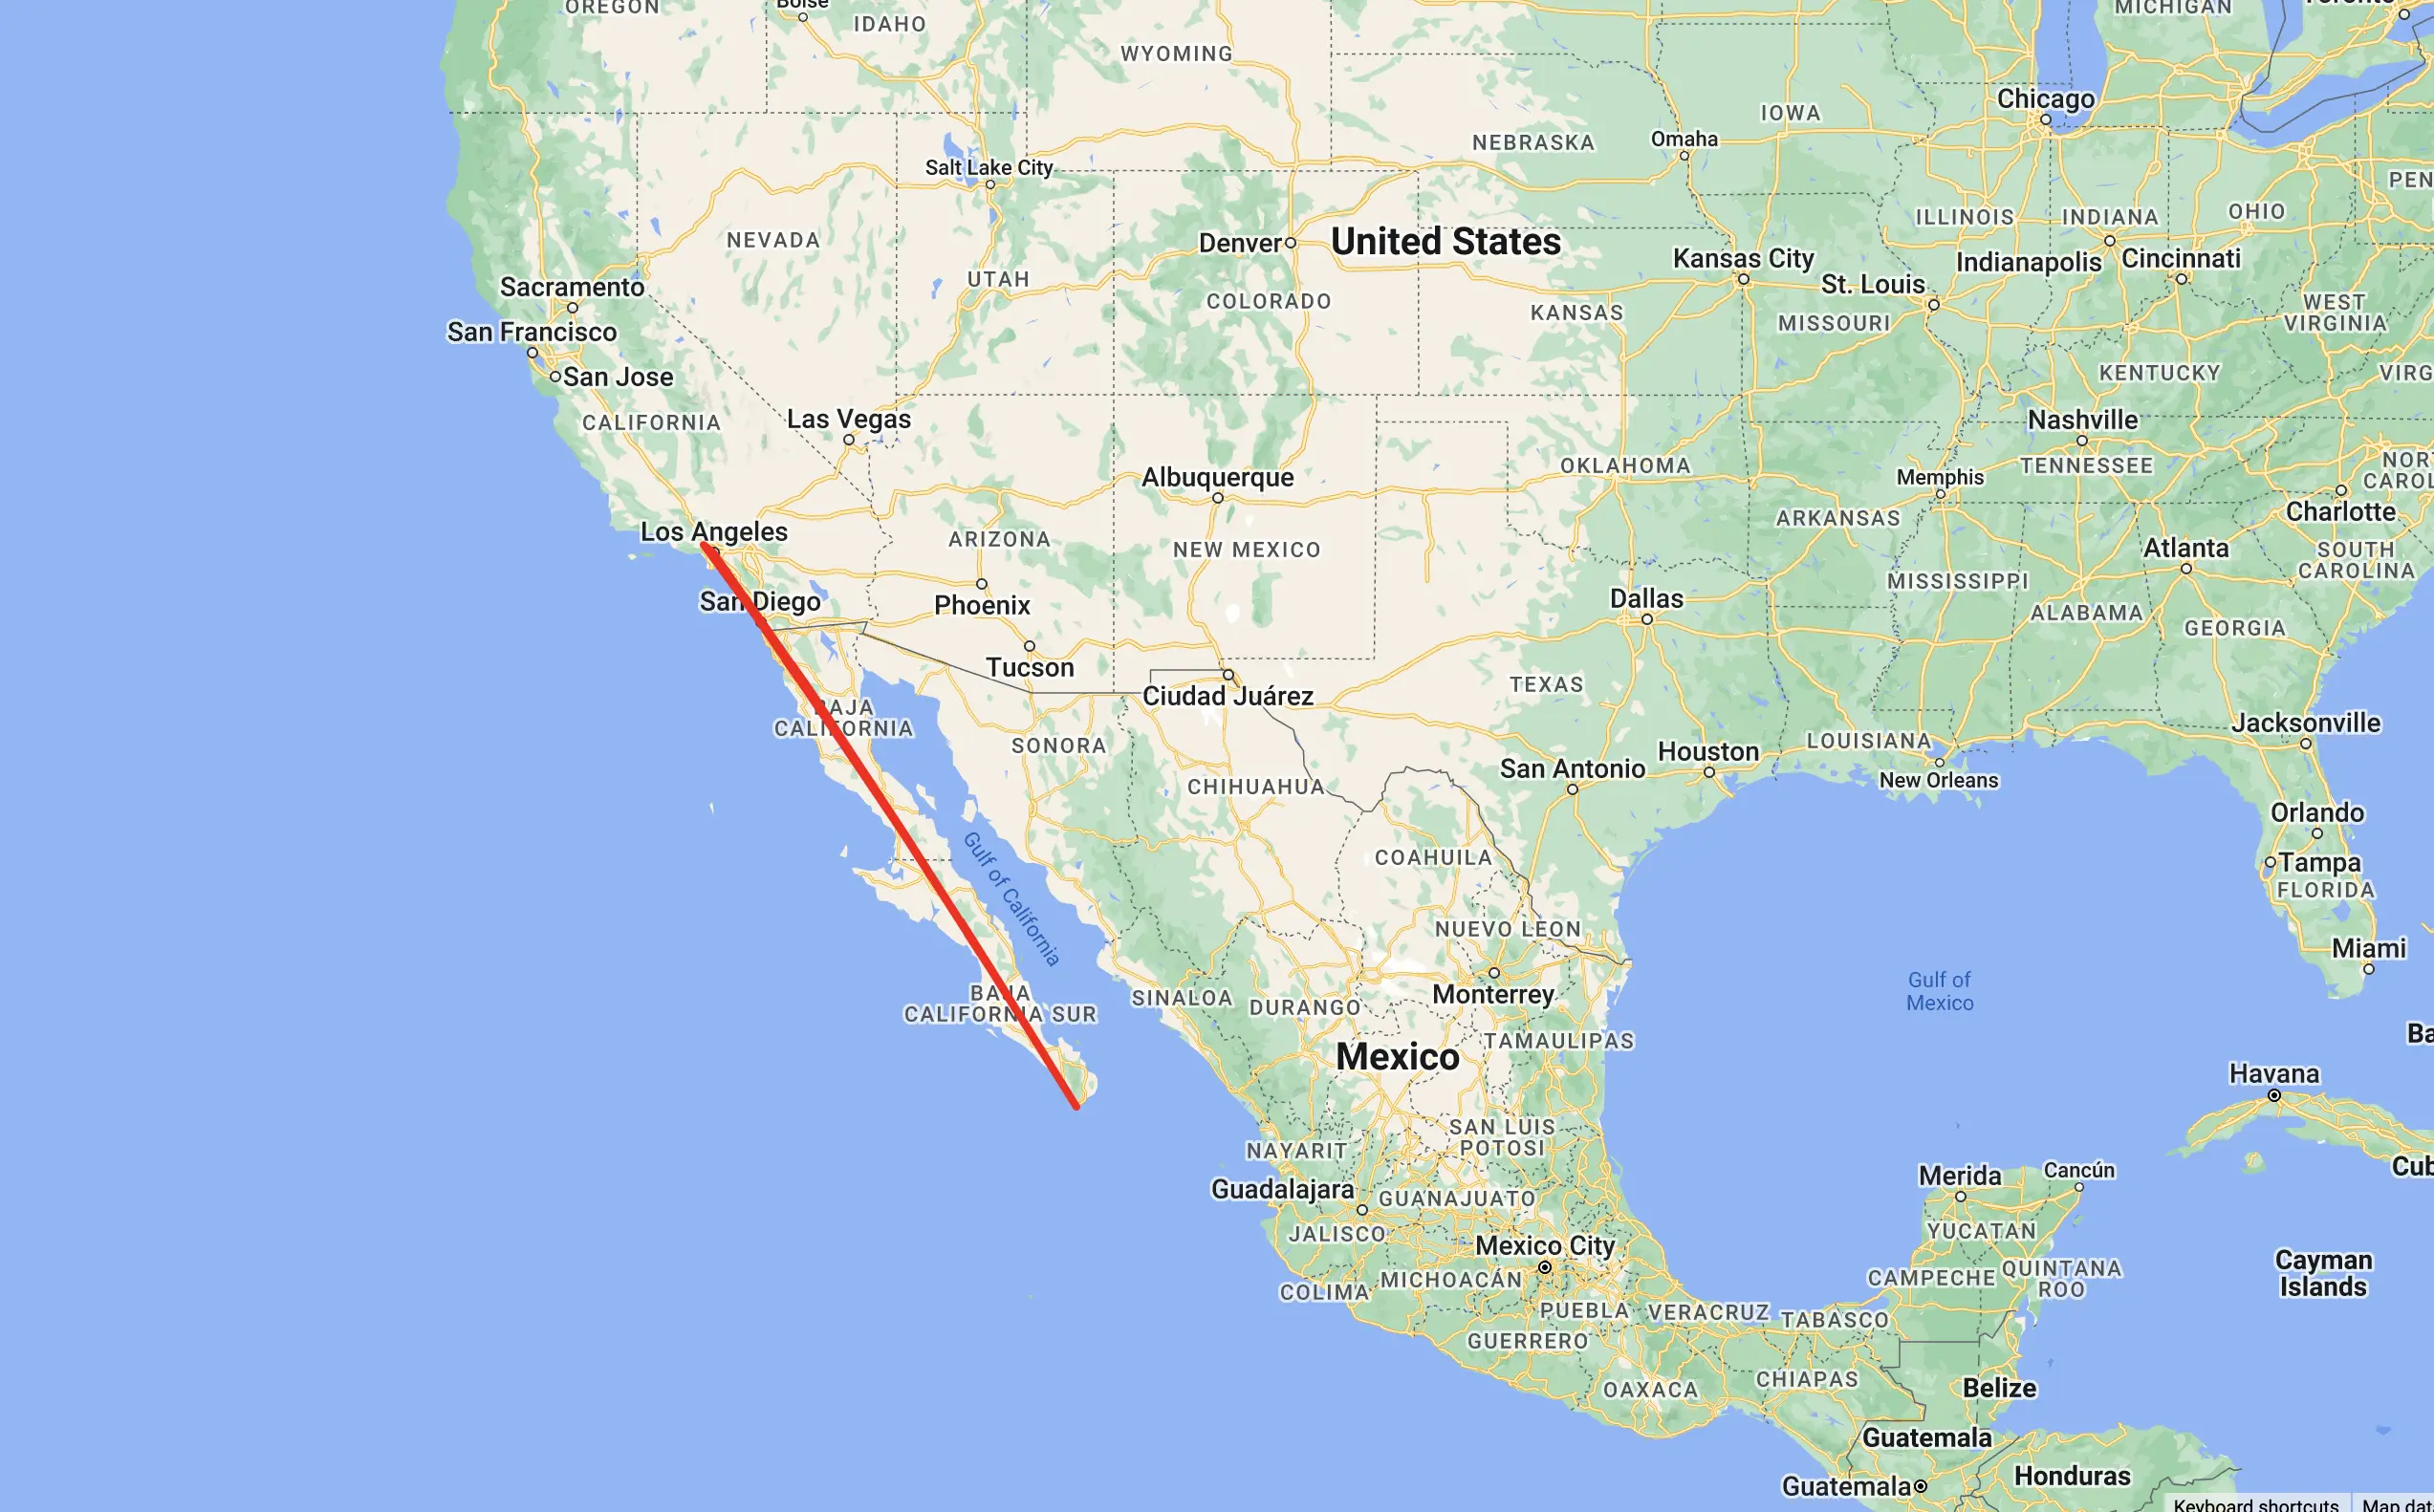 the route from Los Angeles to Cabo San Lucas to Van Nuys Airport and then back to Los Angeles to Cabo San Lucas